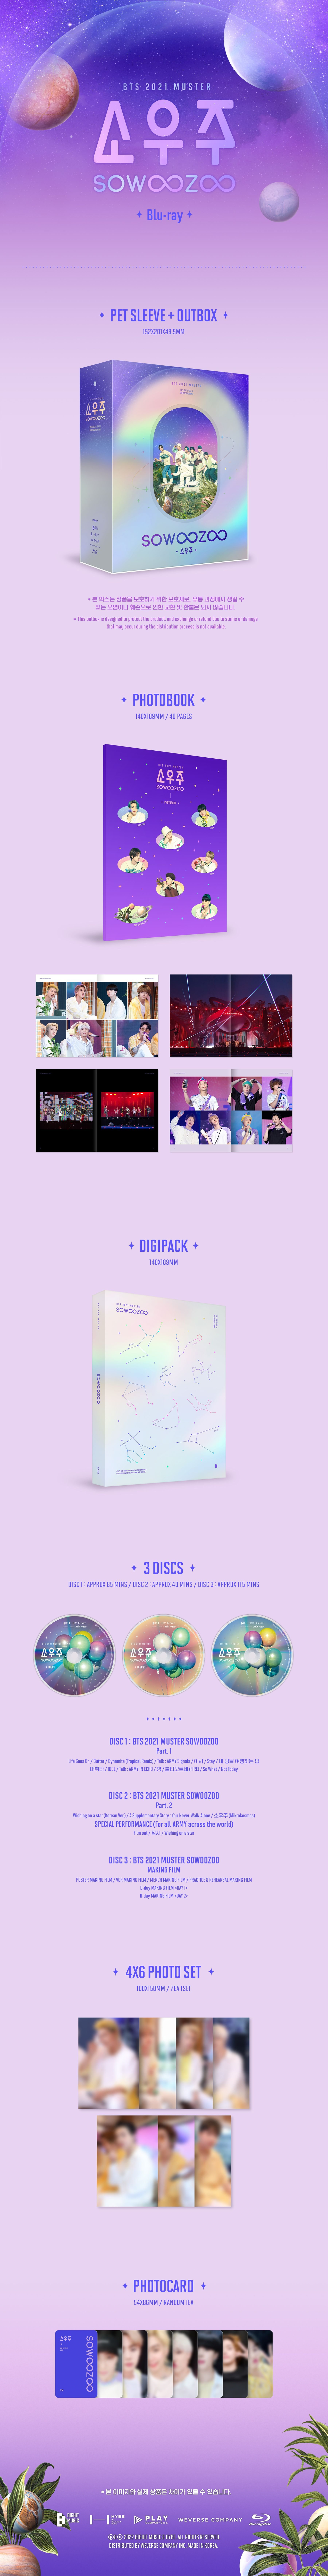 BTS 2021 MUSTER SOWOOZOO Blu-Ray Product Photos